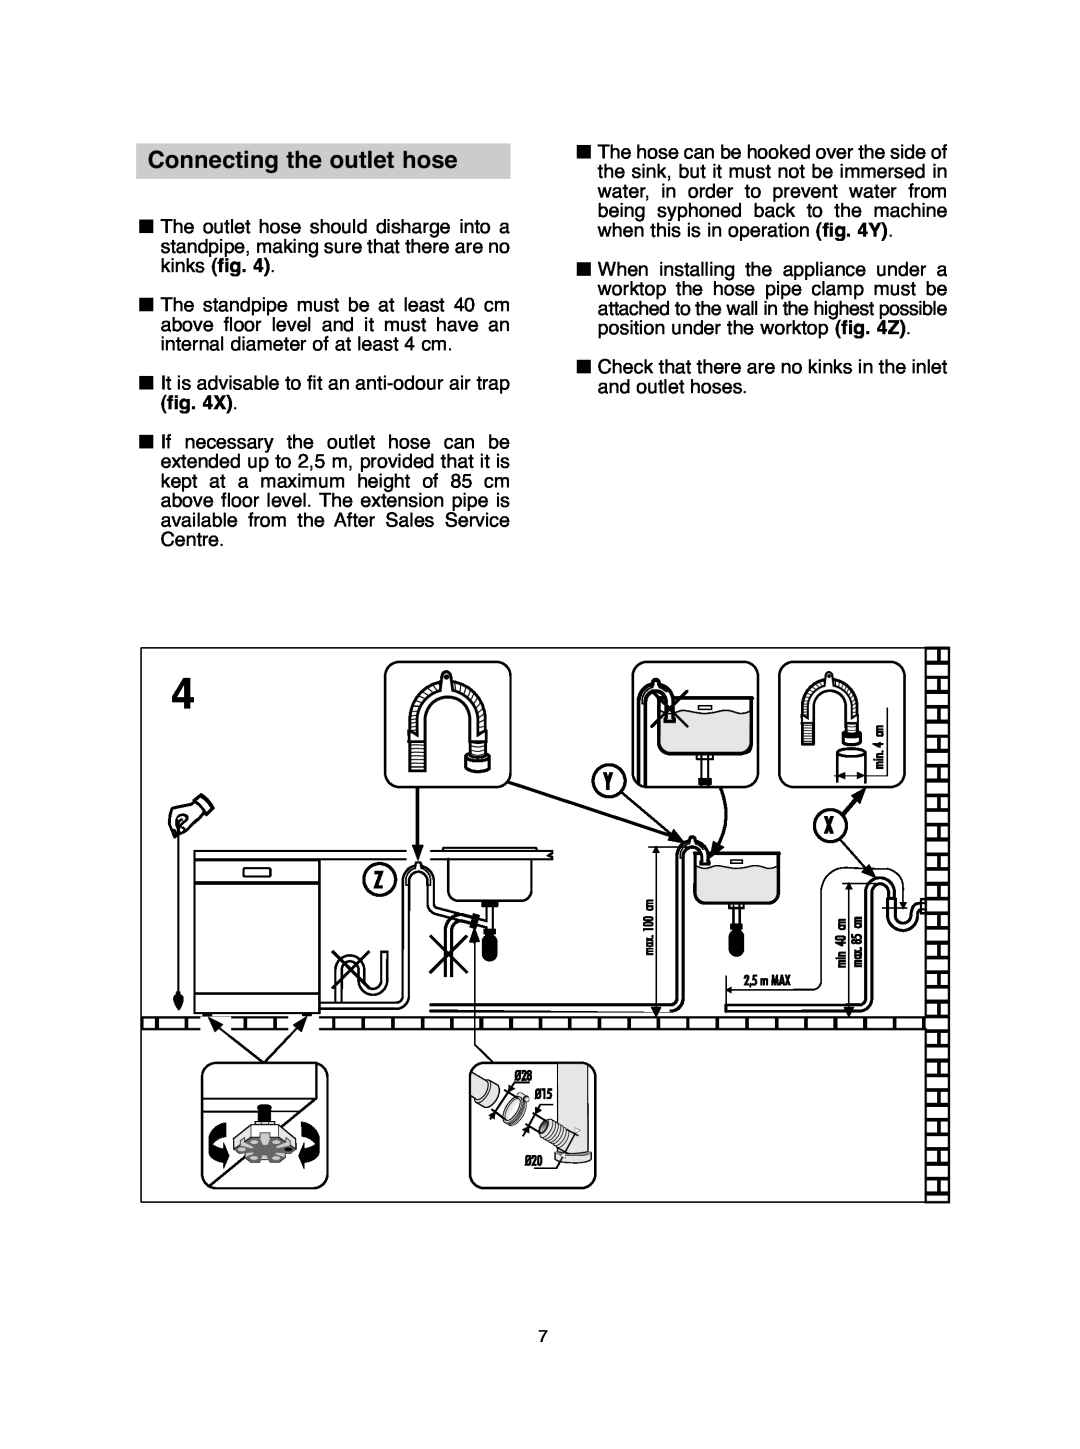 Hoover hoover dishwasher manual Connecting the outlet hose 